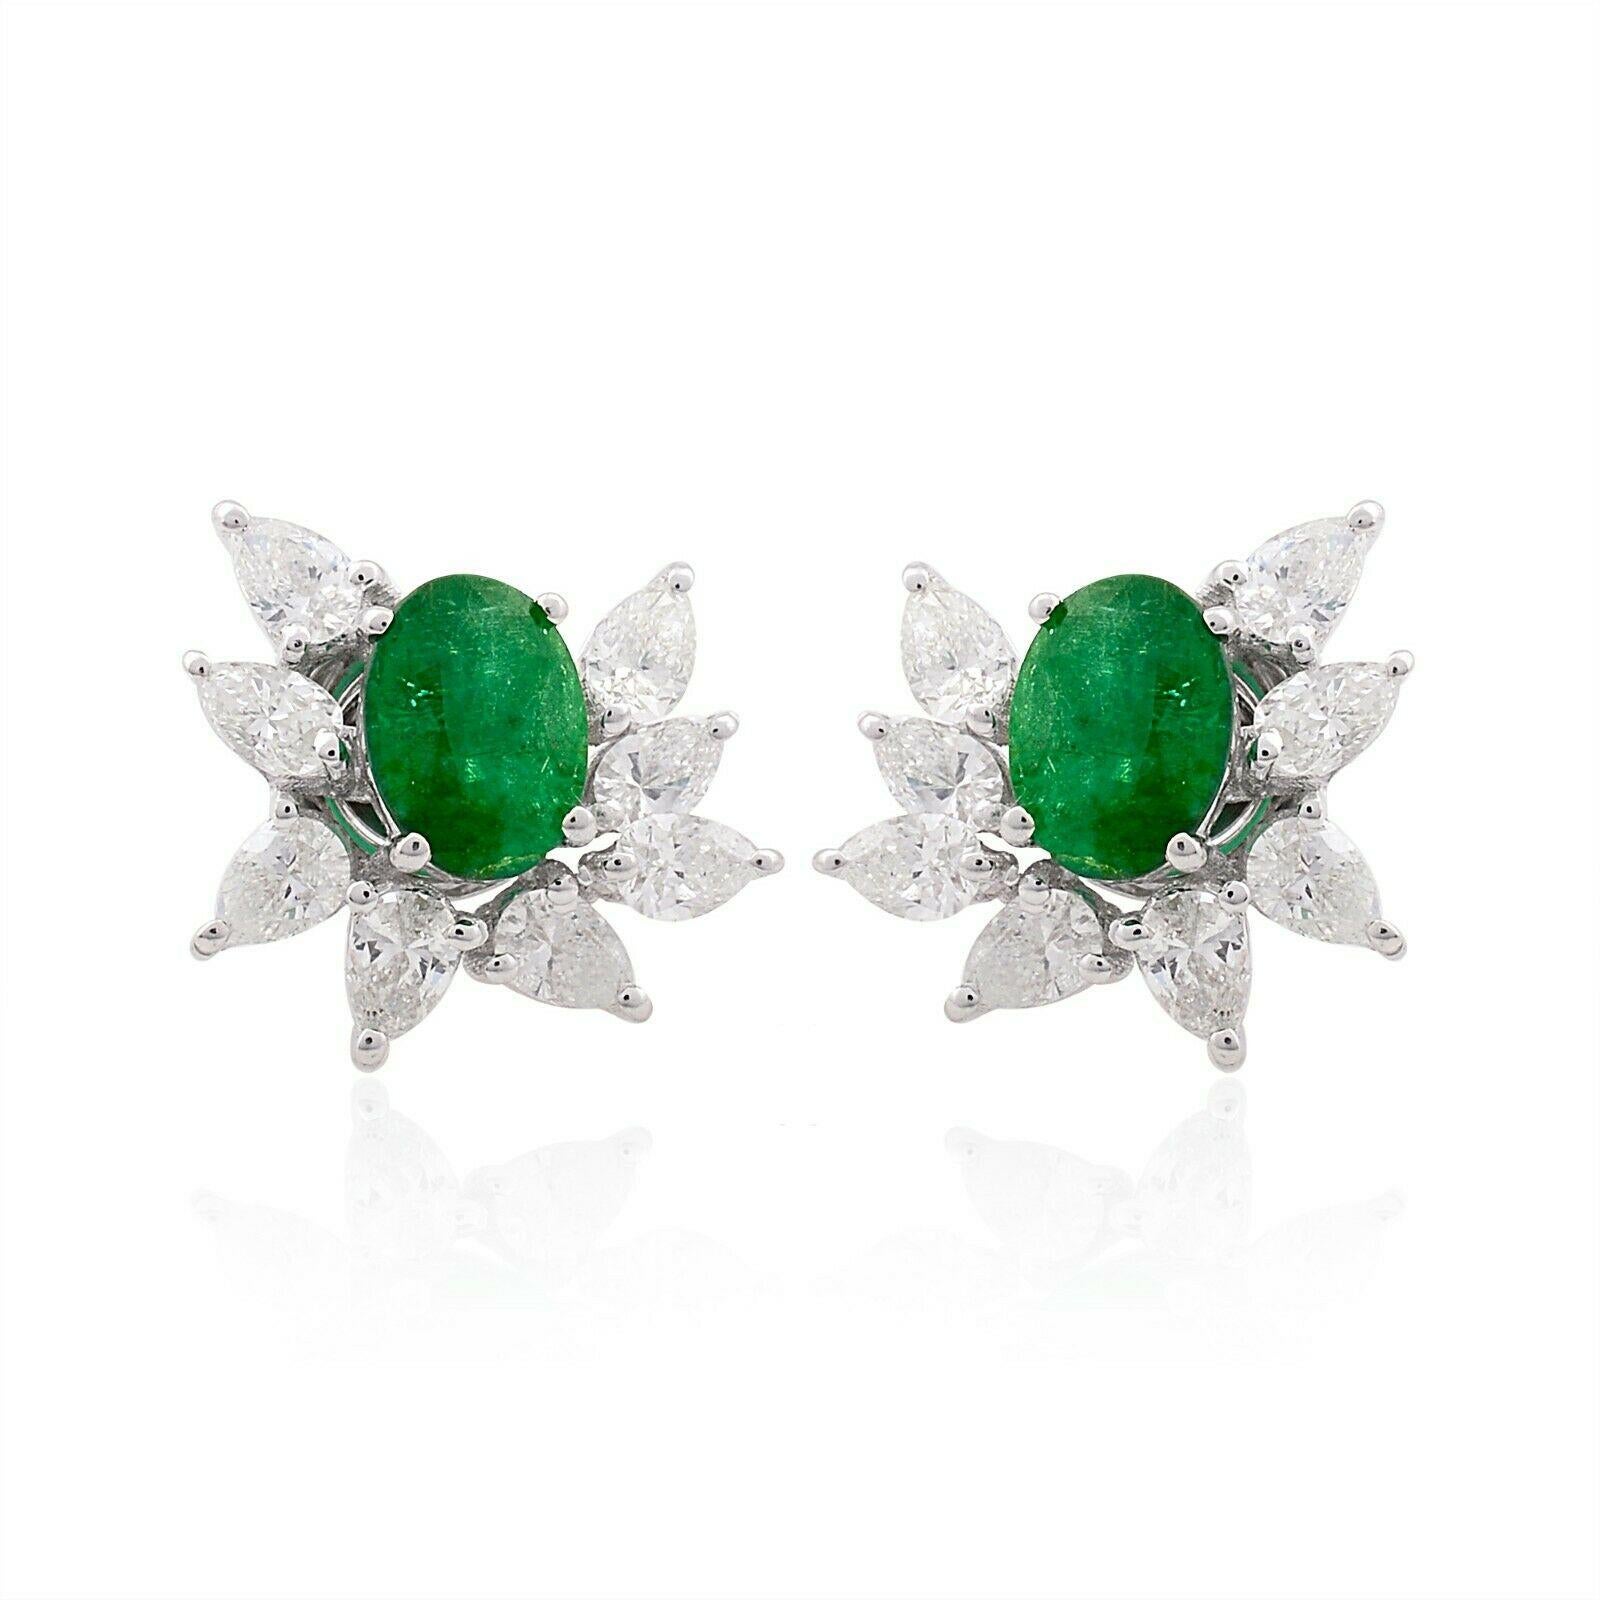 Cast in 14 karat white gold, these stunning stud earrings are hand set with 1.38 carats emerald and 1.35 carats of glimmering diamonds. 

FOLLOW MEGHNA JEWELS storefront to view the latest collection & exclusive pieces. Meghna Jewels is proudly